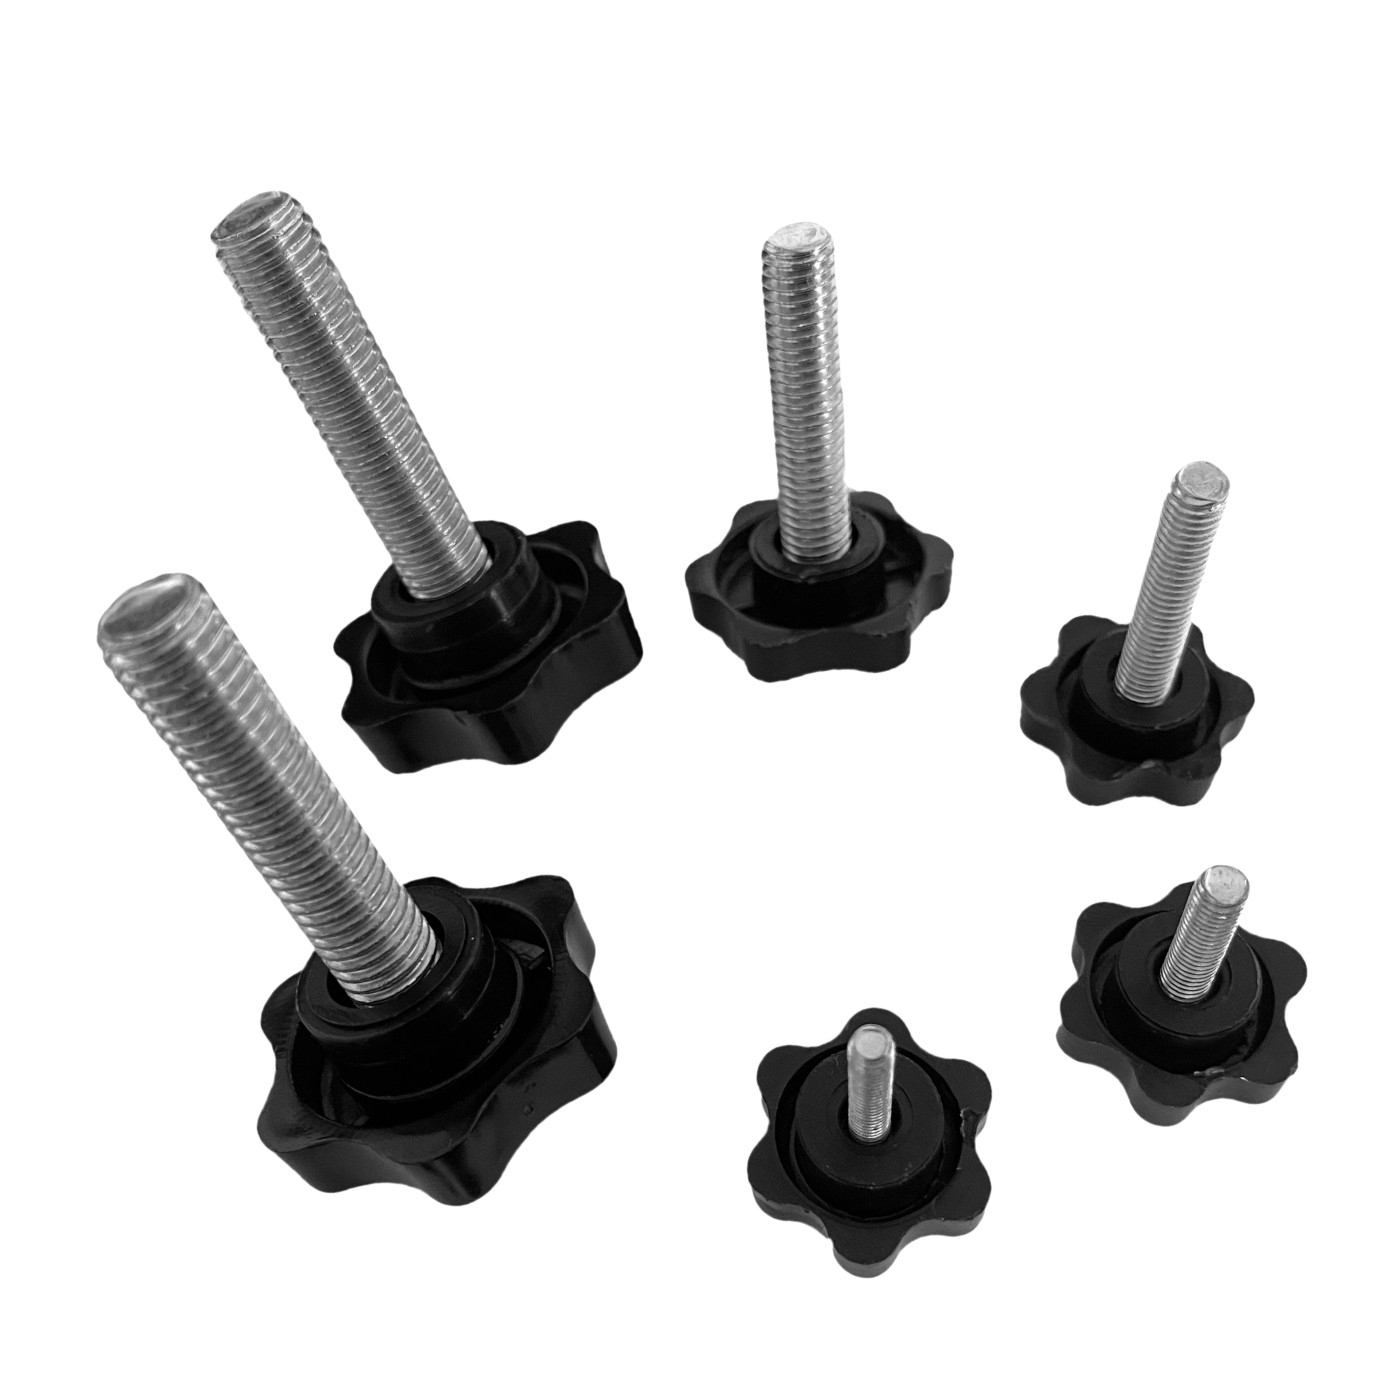 Set of 10 star knobs with threaded rod (M6, black)